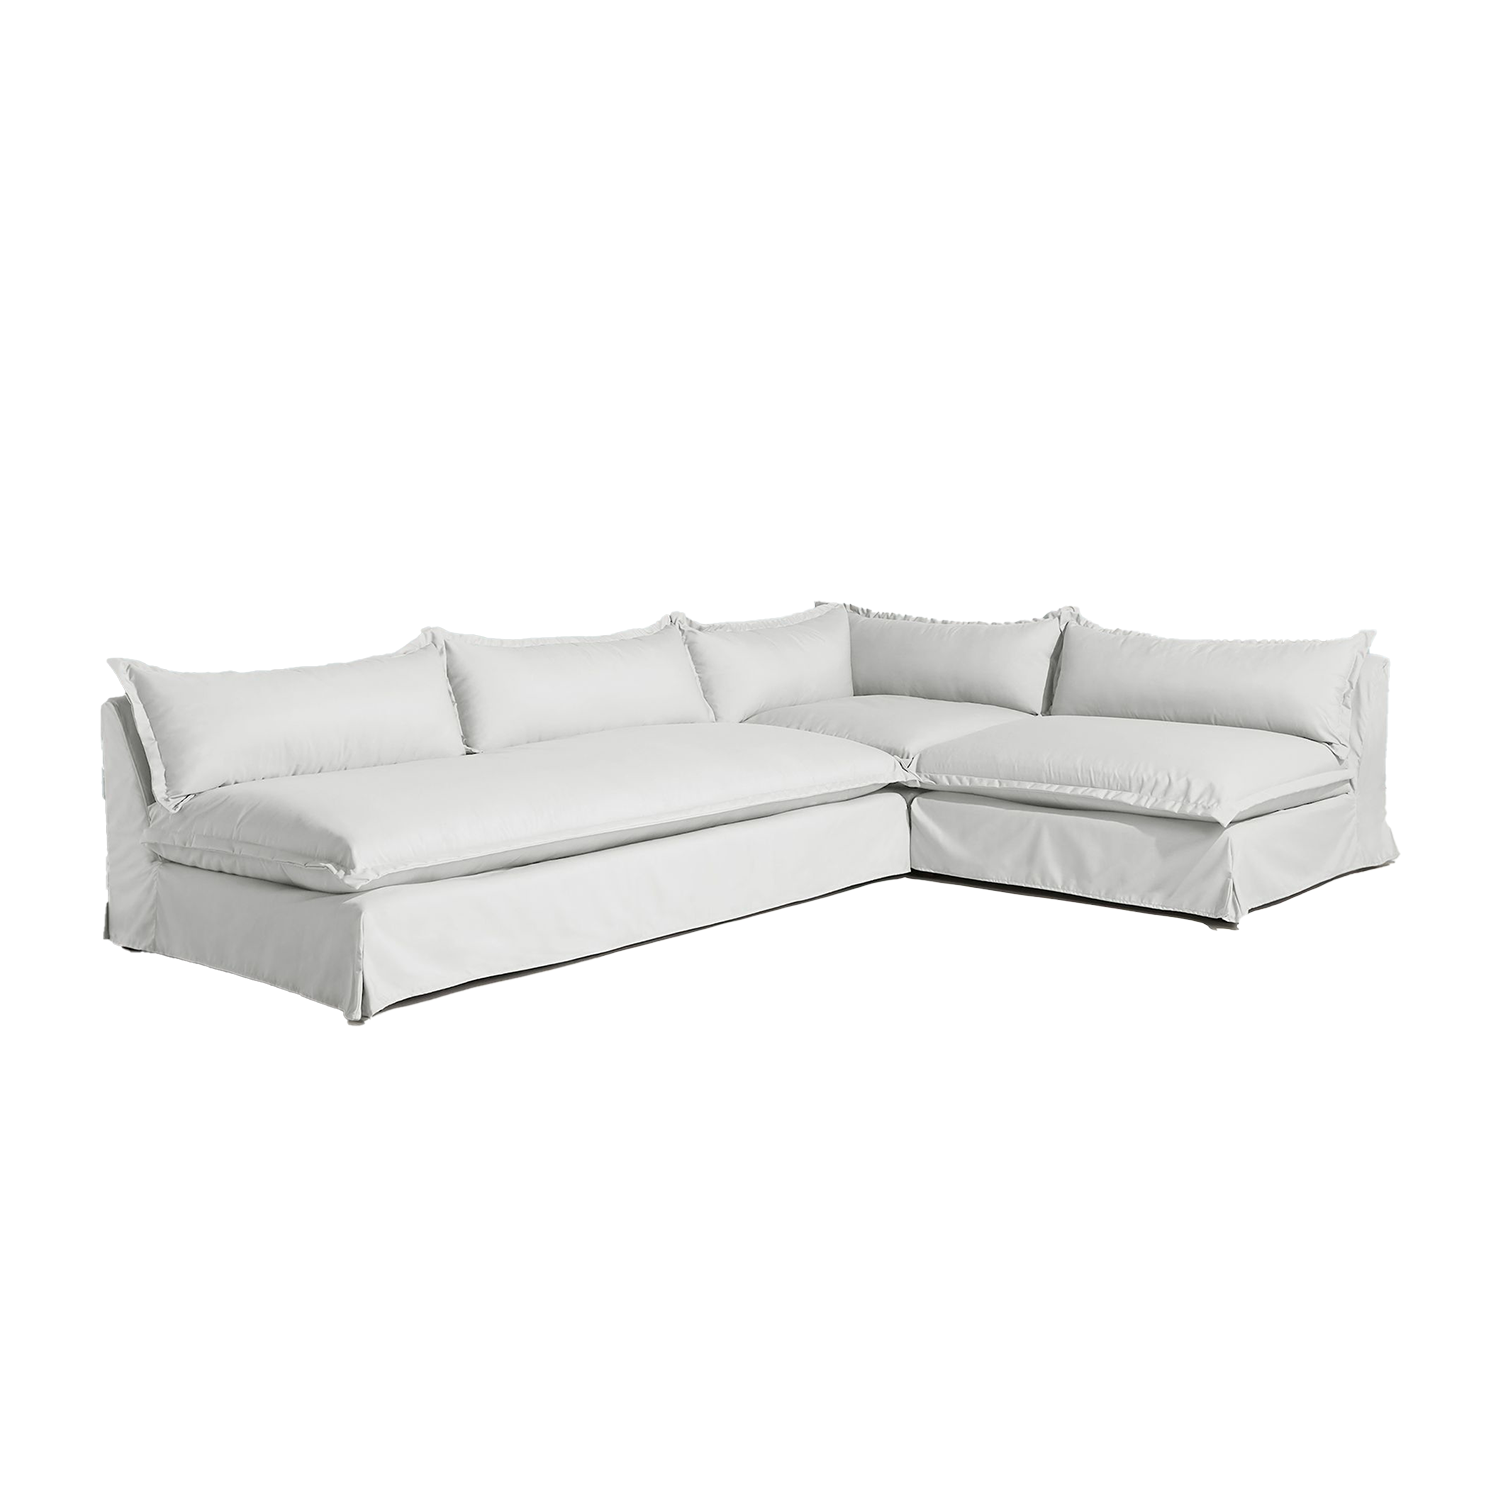 anthropologie sectional